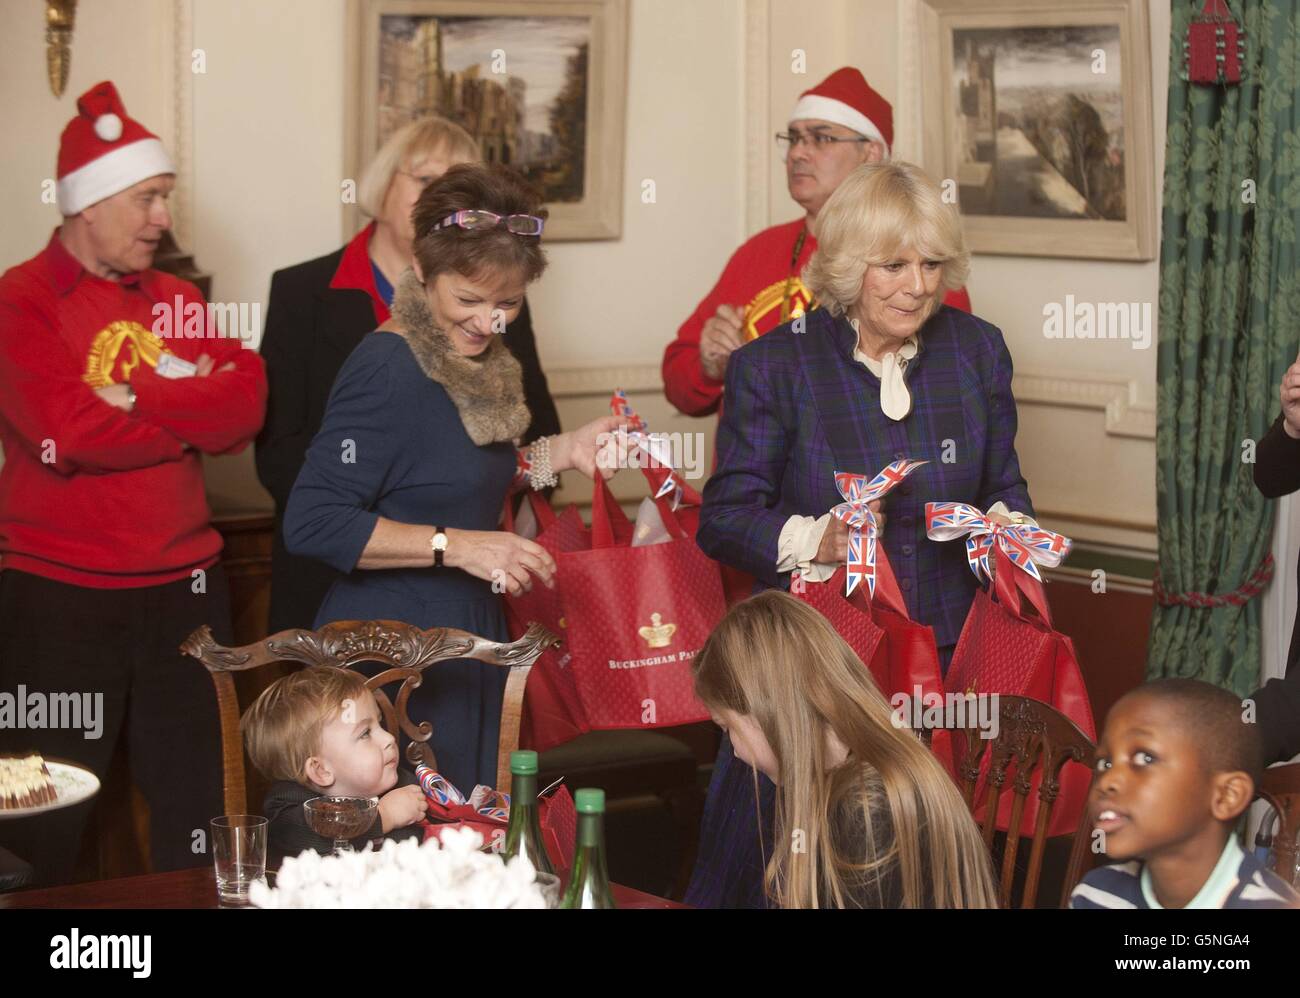 The Duchess of Cornwall meets her guests as she invited a group of youngsters to Clarence House, London, to help decorate her Christmas tree. PRESS ASSOCIATION Photo. Picture date: Wednesday December 12, 2012. Camilla got into the festive spirit and was ably assisted by children with life-shortening diseases. The eight youngsters, who receive support from the Helen & Douglas House Hospice, based in Oxford, not only placed baubles on the tree but also enjoyed a bangers-and-mash lunch with the Duchess. Camilla is patron of the hospice, which provides respite and end- of-life care for youngsters Stock Photo